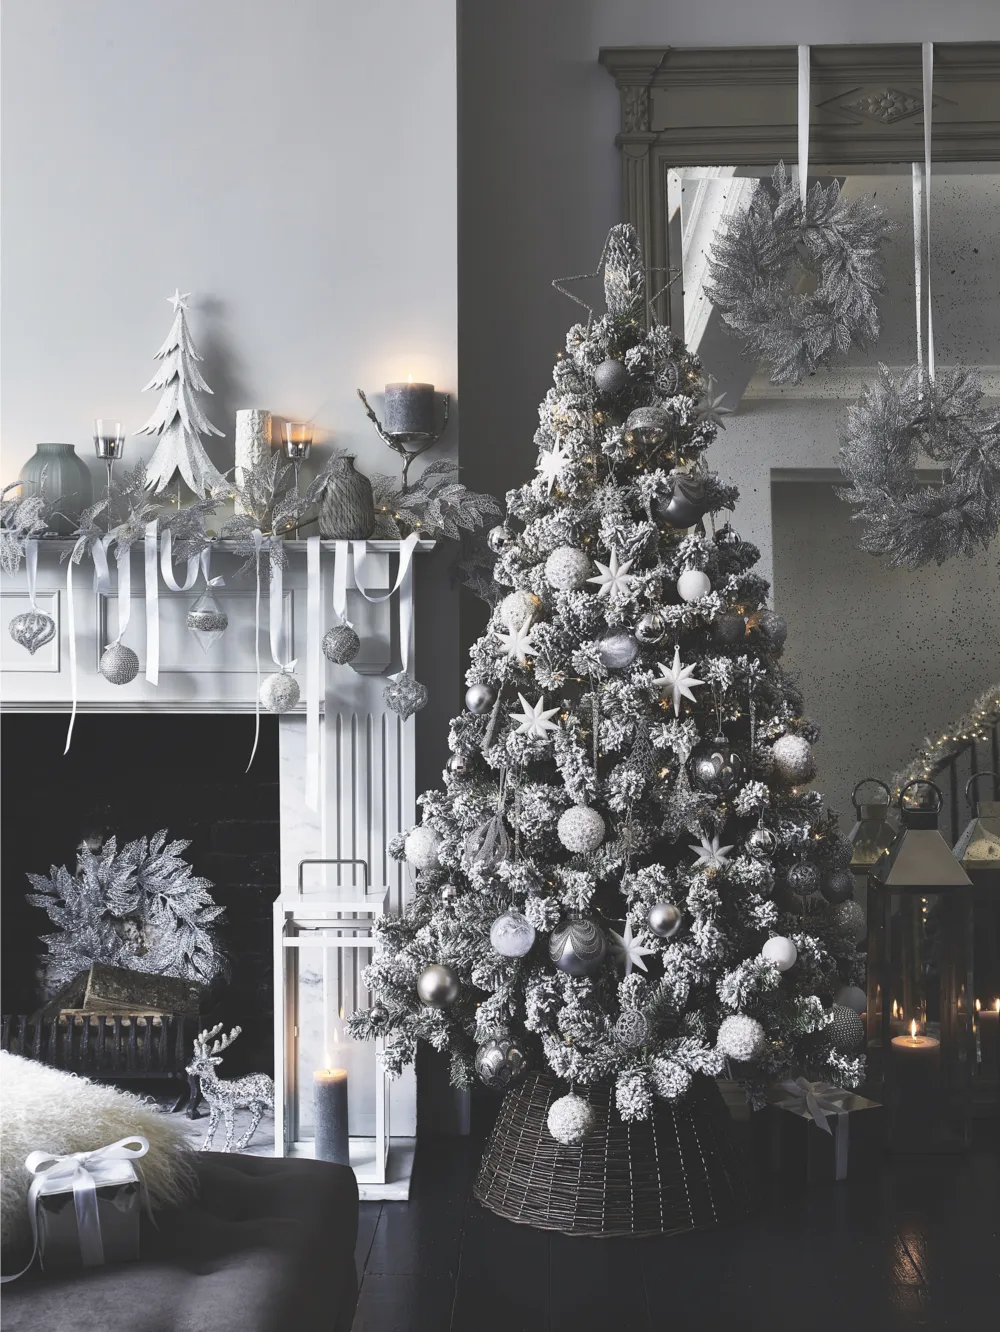 A white and silver hued tree sparkles next to a white fireplace with various white and silver decorations